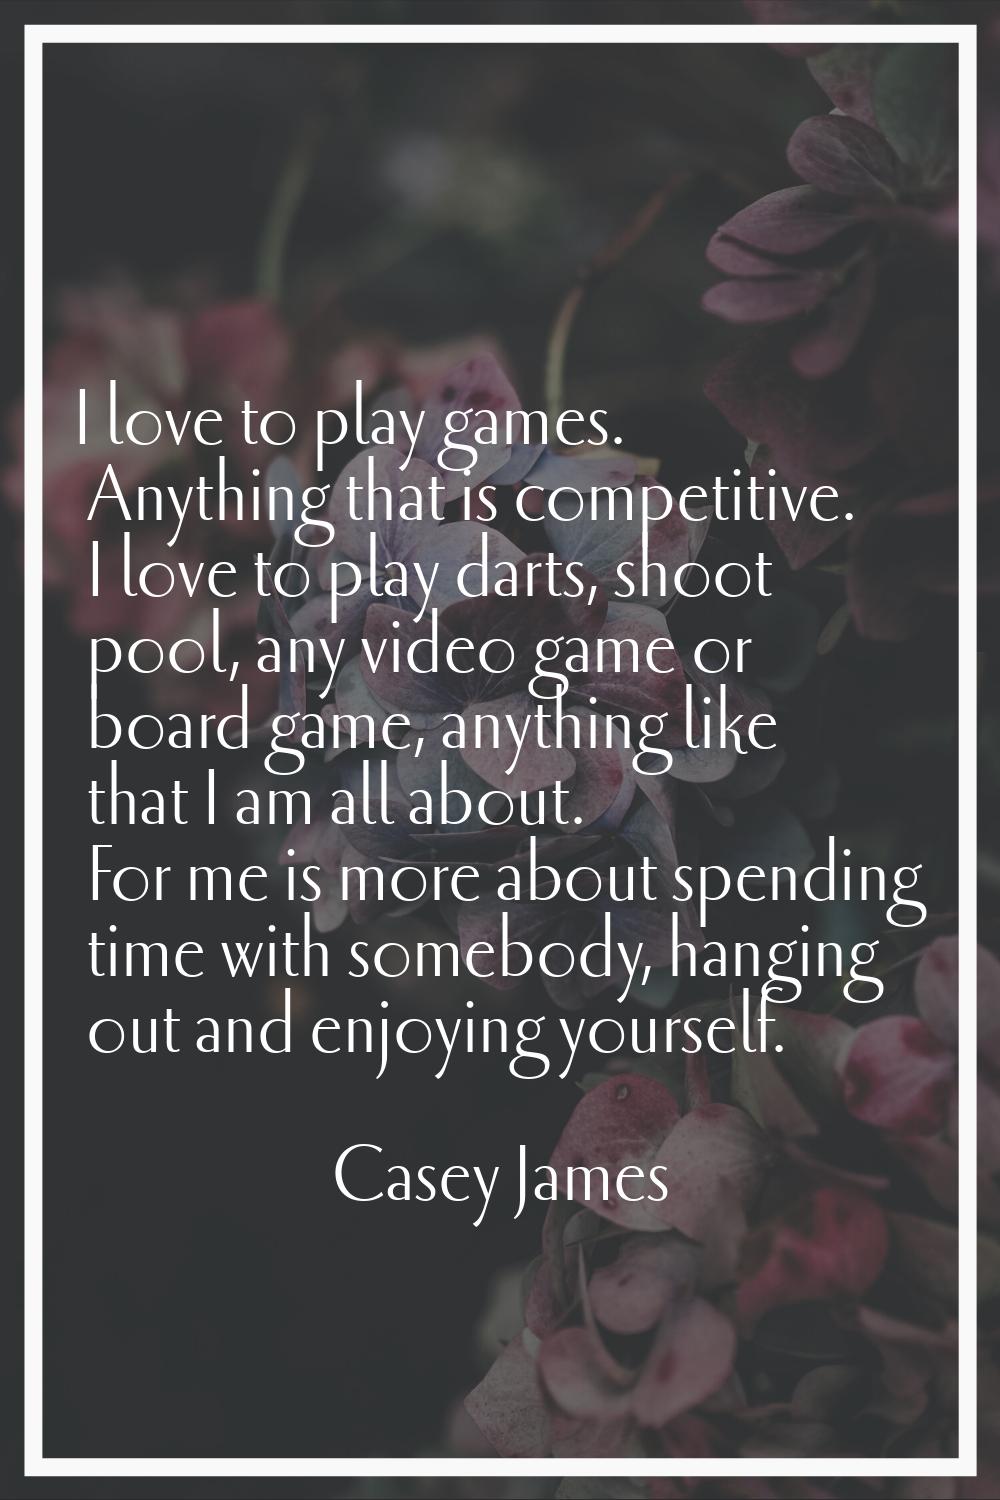 I love to play games. Anything that is competitive. I love to play darts, shoot pool, any video gam